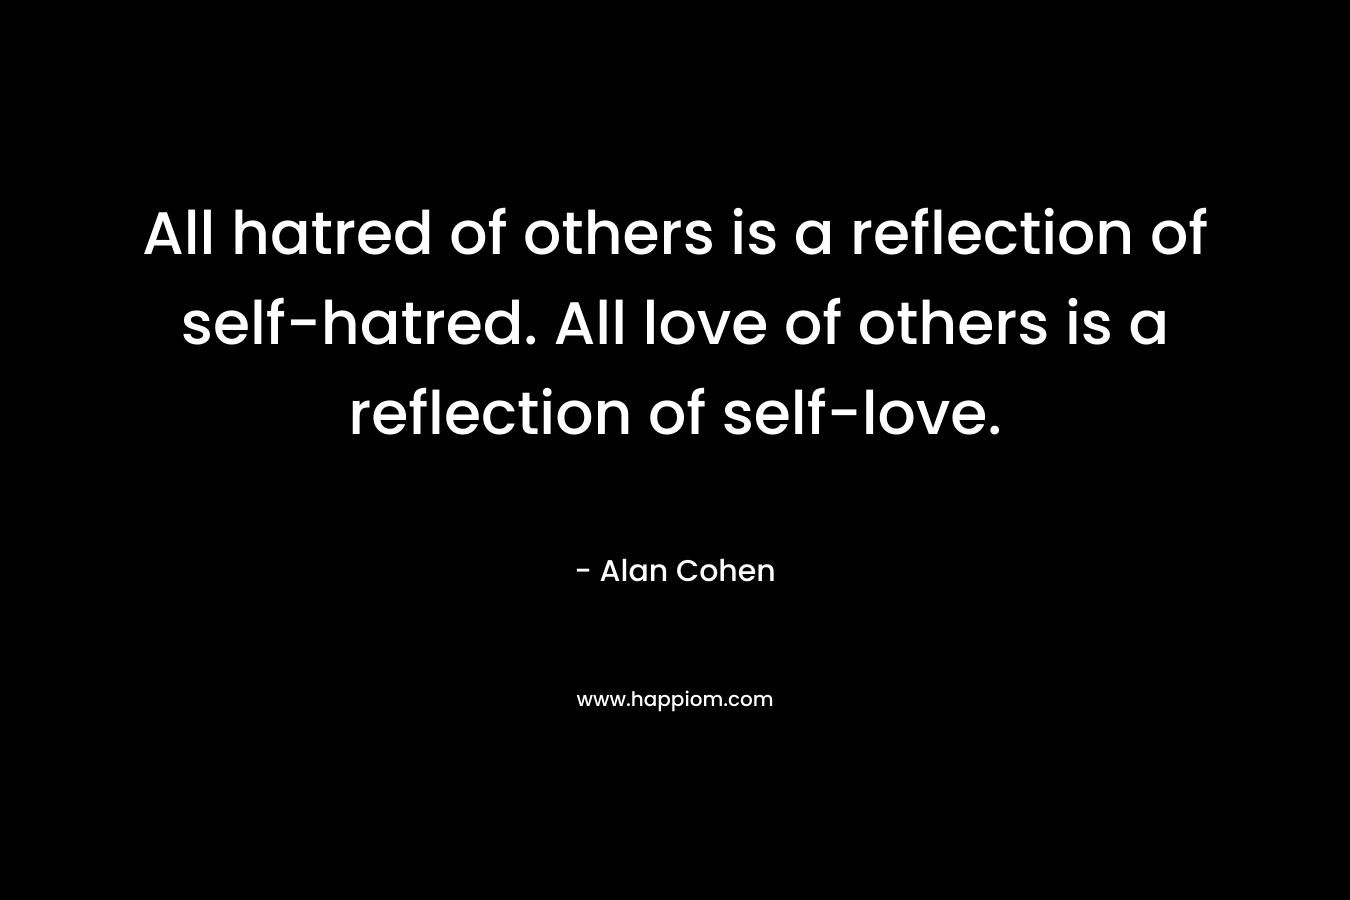 All hatred of others is a reflection of self-hatred. All love of others is a reflection of self-love. – Alan Cohen